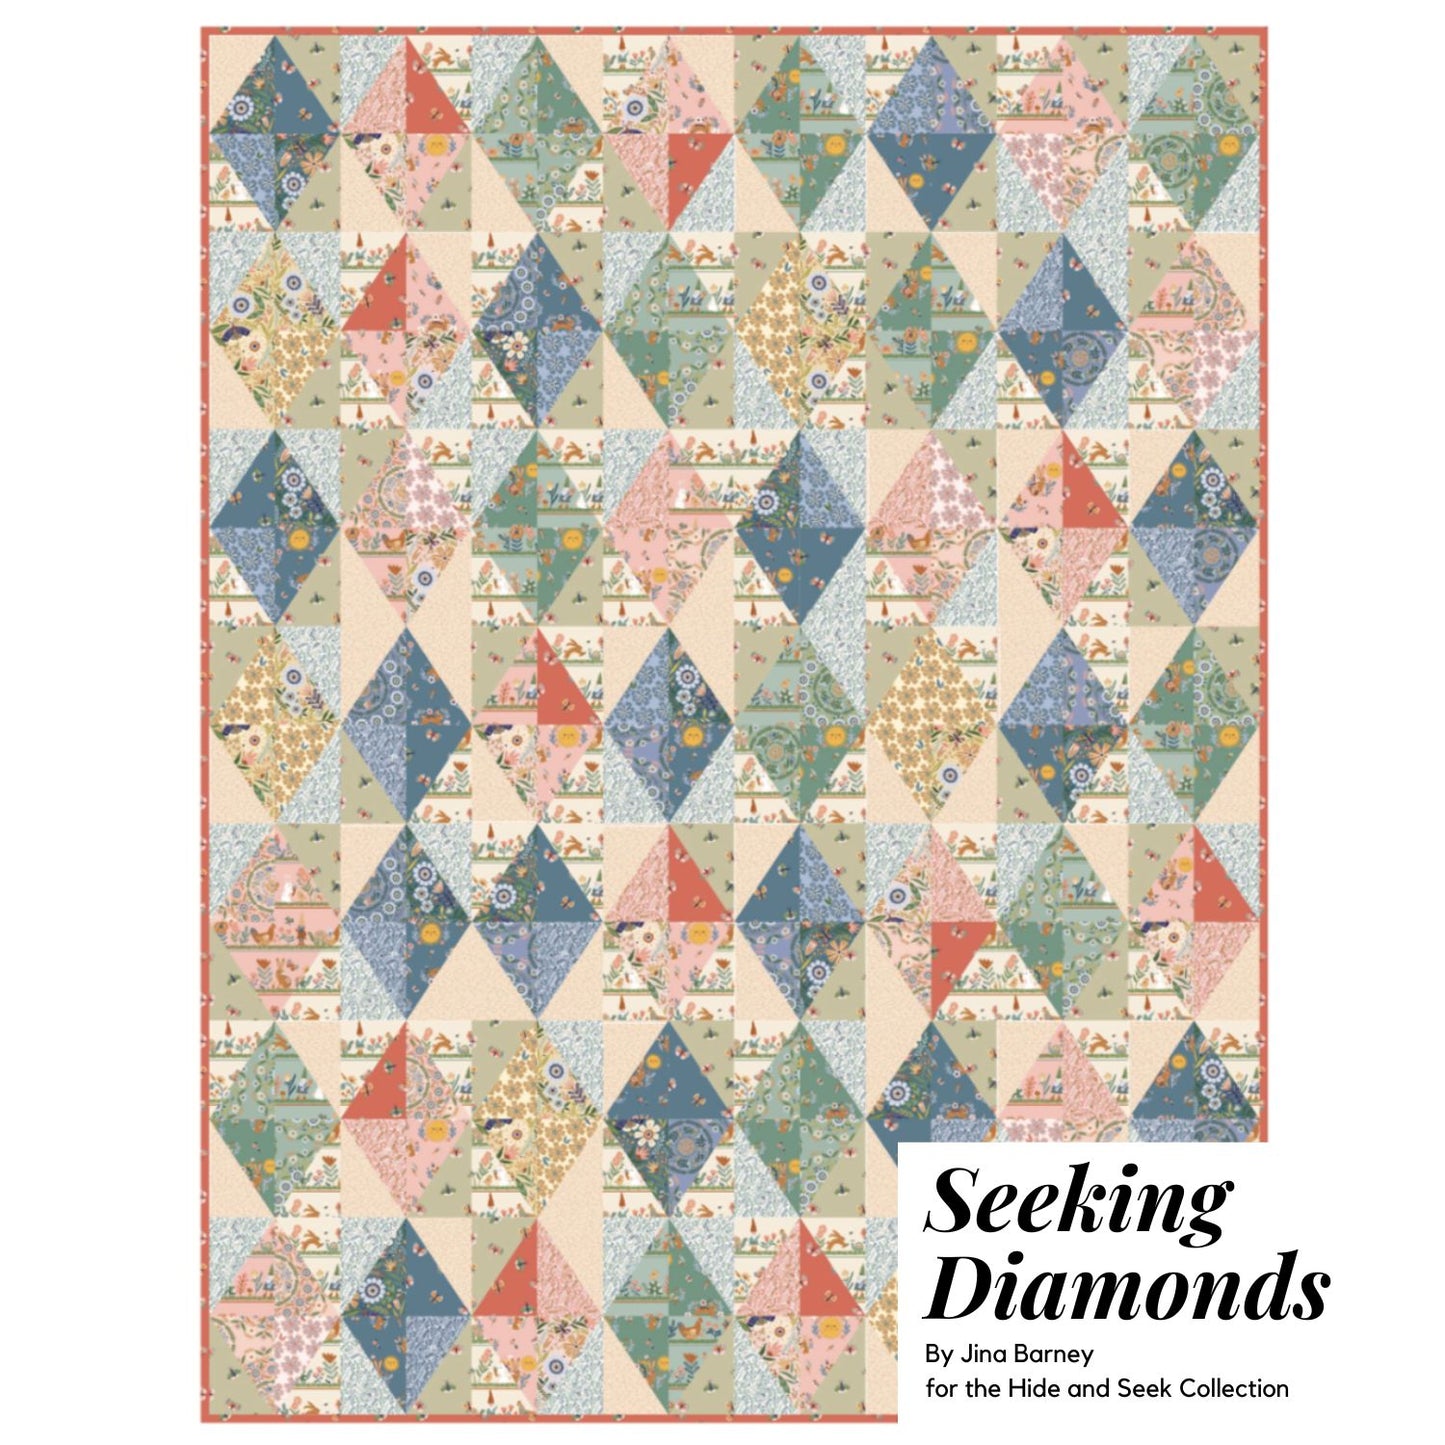 Seeking Diamonds Quilt Pattern, for the Hide & Seek Collection